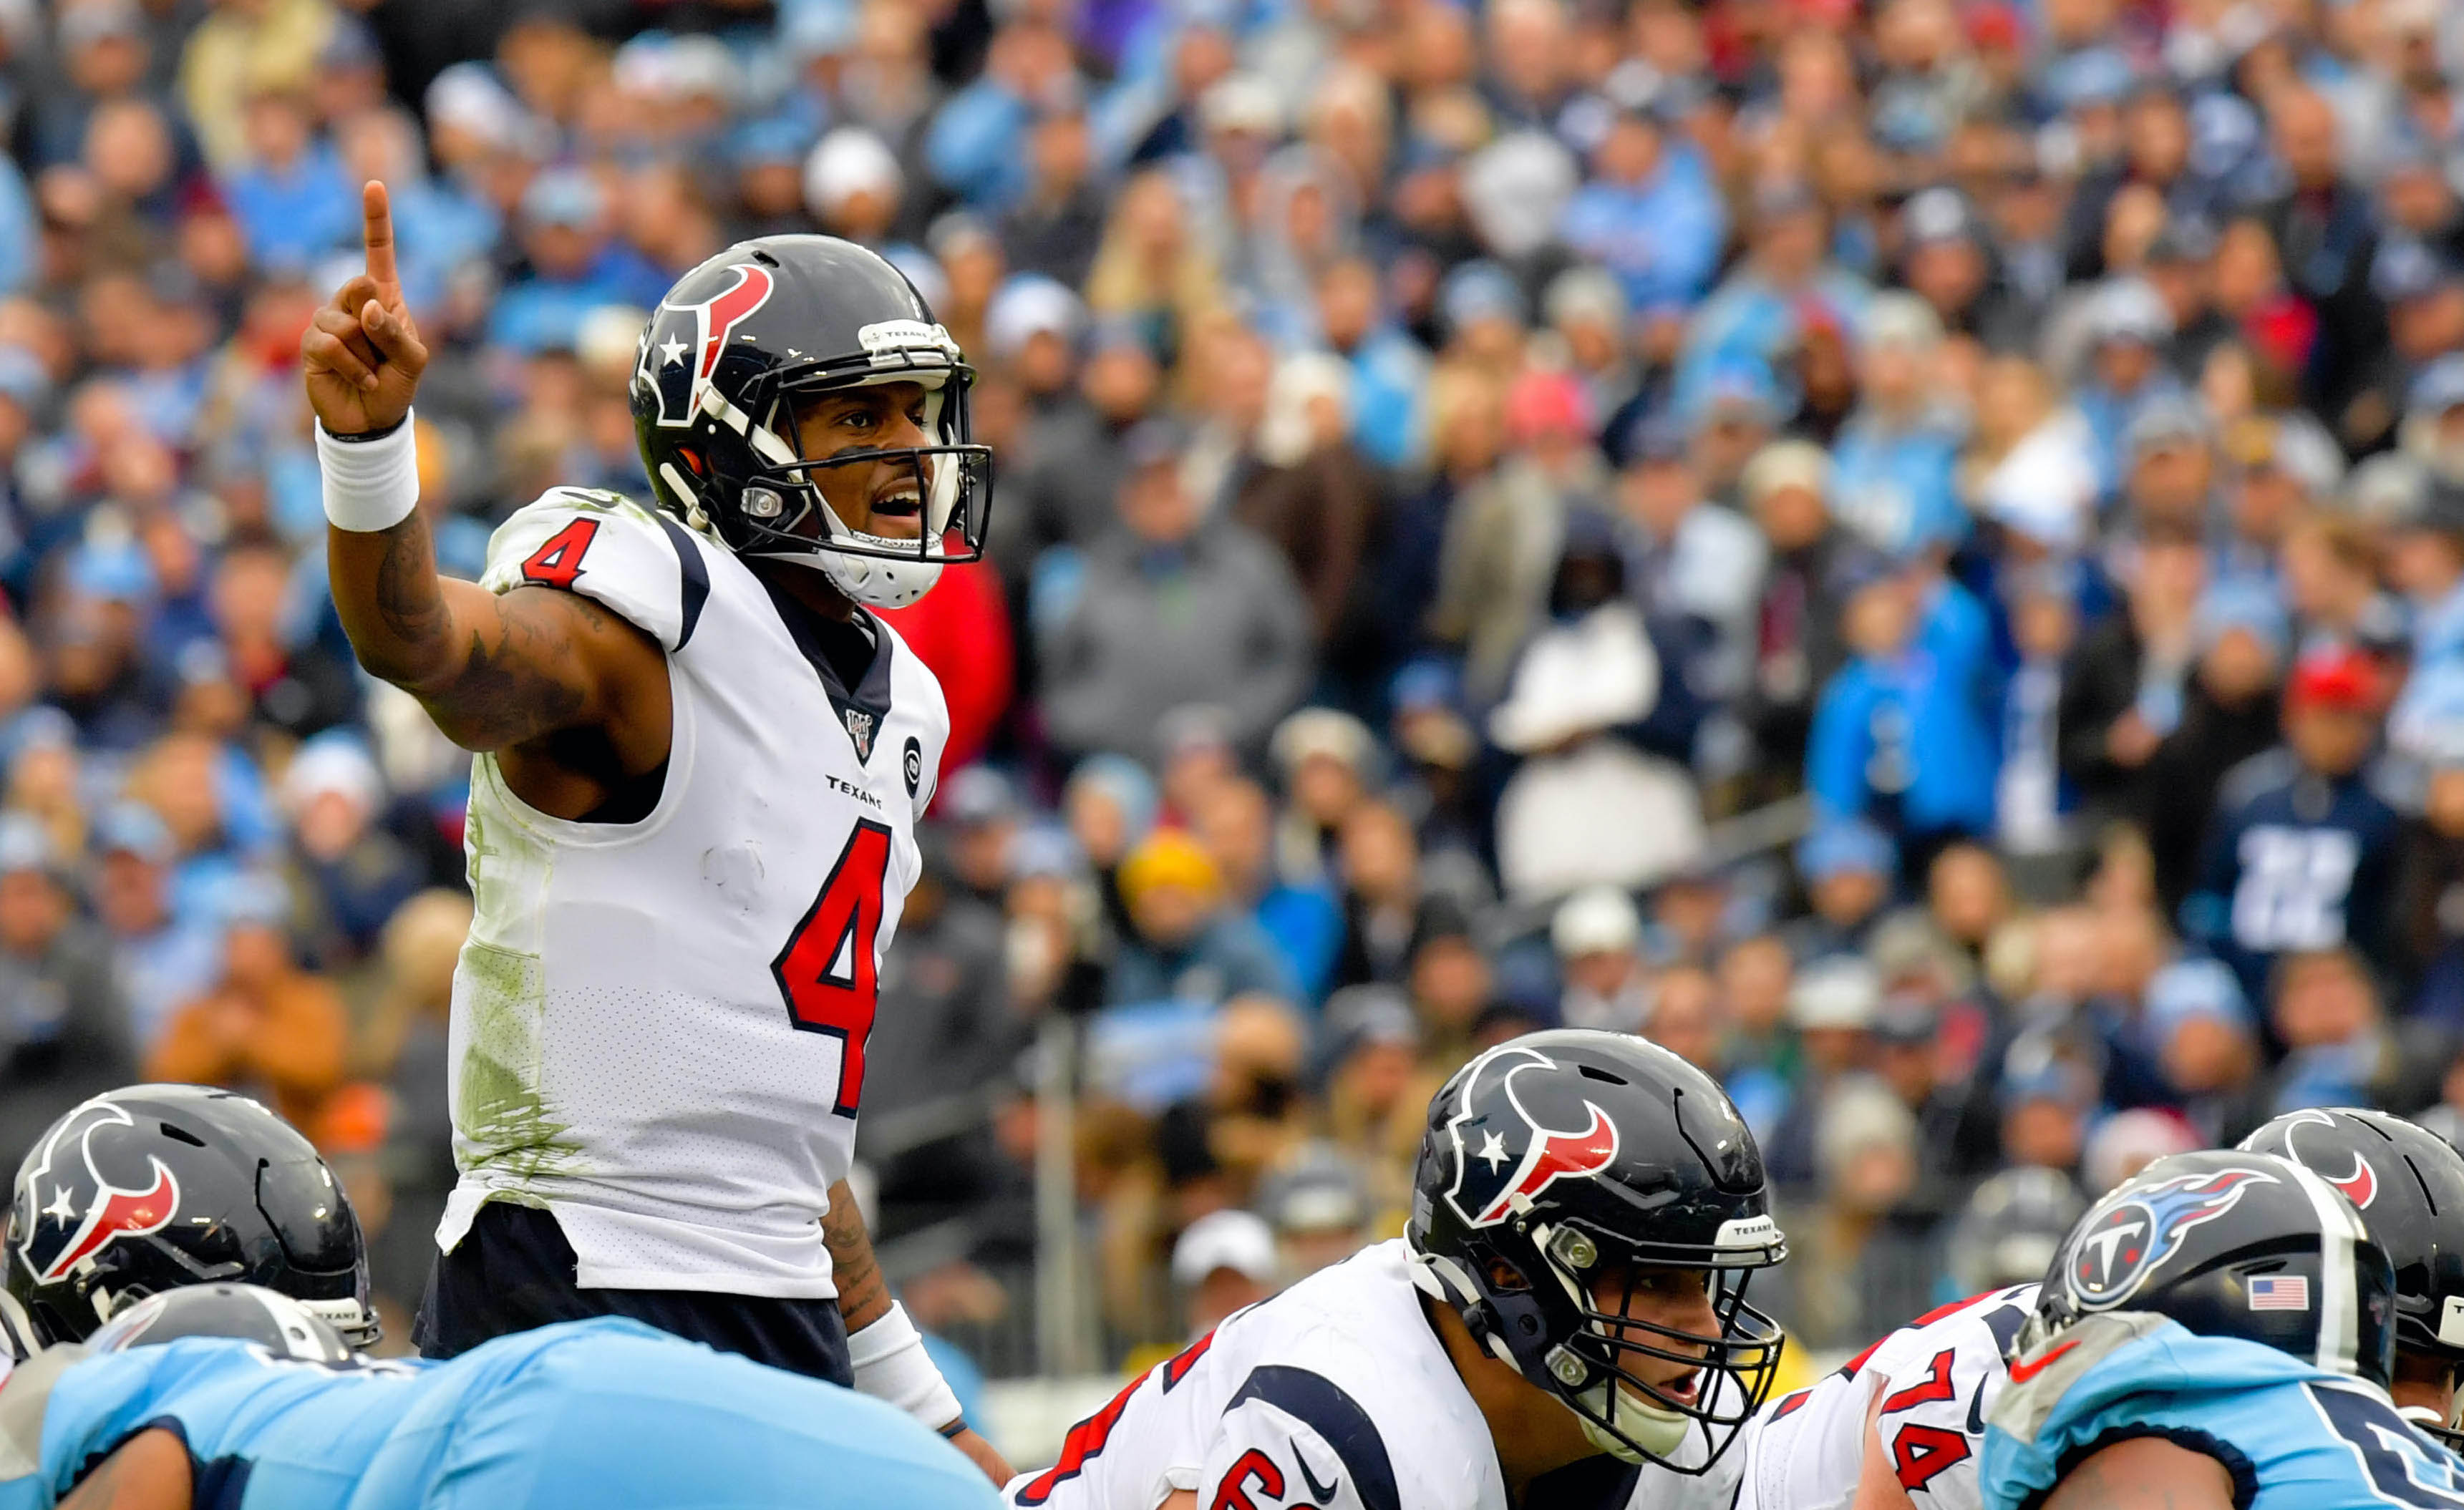 Flipboard: Texans Deshaun Watson's 4th Quarter Play Proved The Difference in The Win ...3442 x 2110